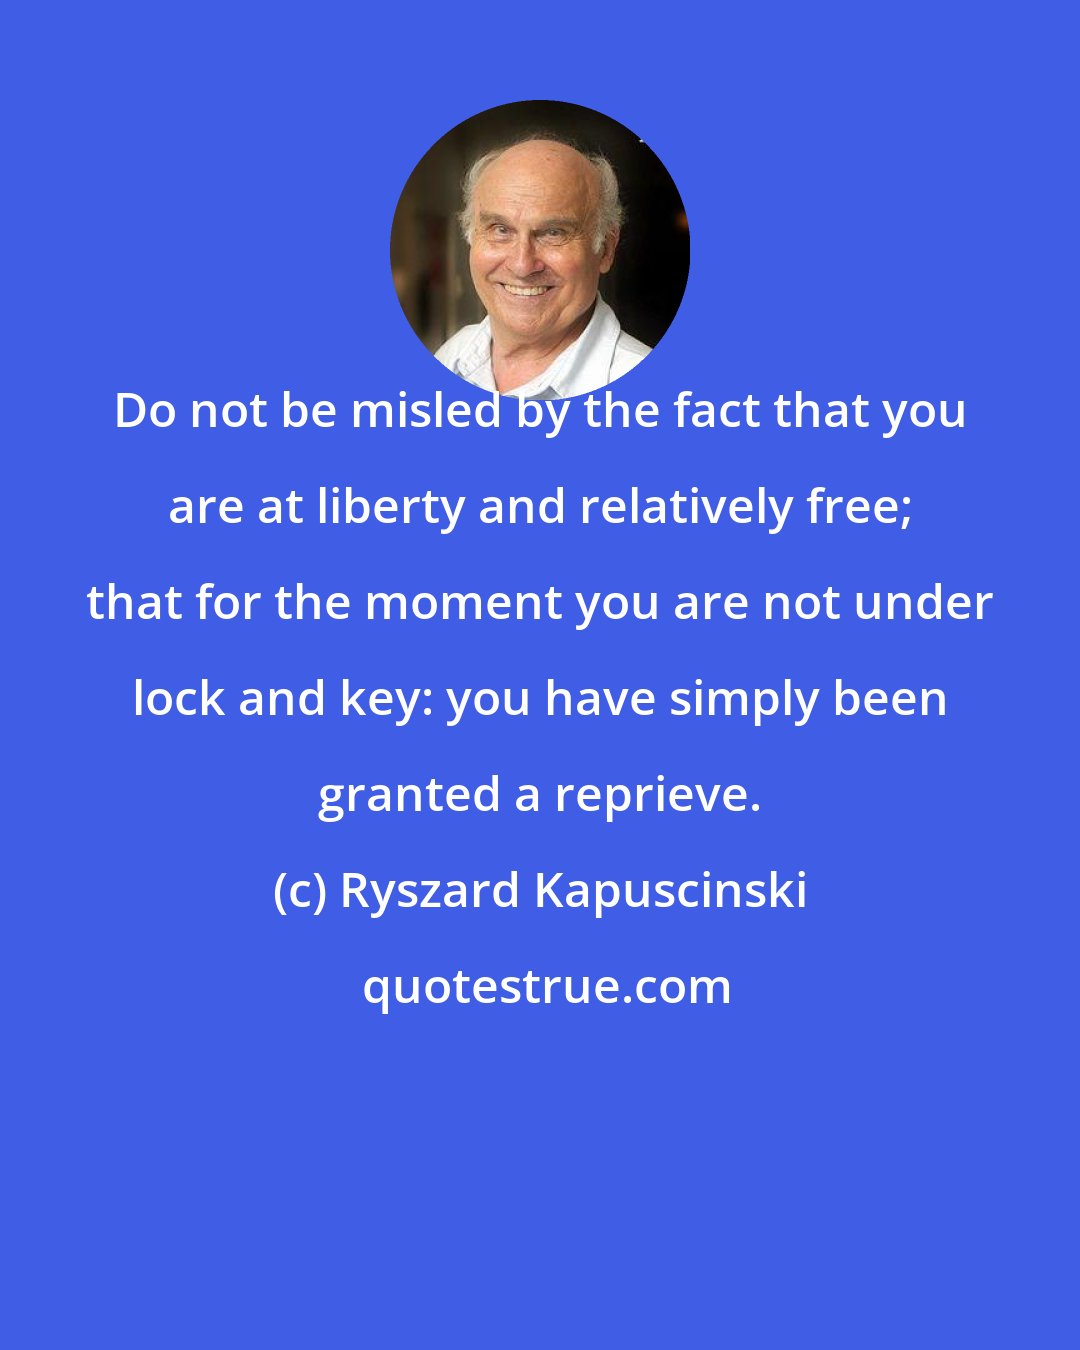 Ryszard Kapuscinski: Do not be misled by the fact that you are at liberty and relatively free; that for the moment you are not under lock and key: you have simply been granted a reprieve.